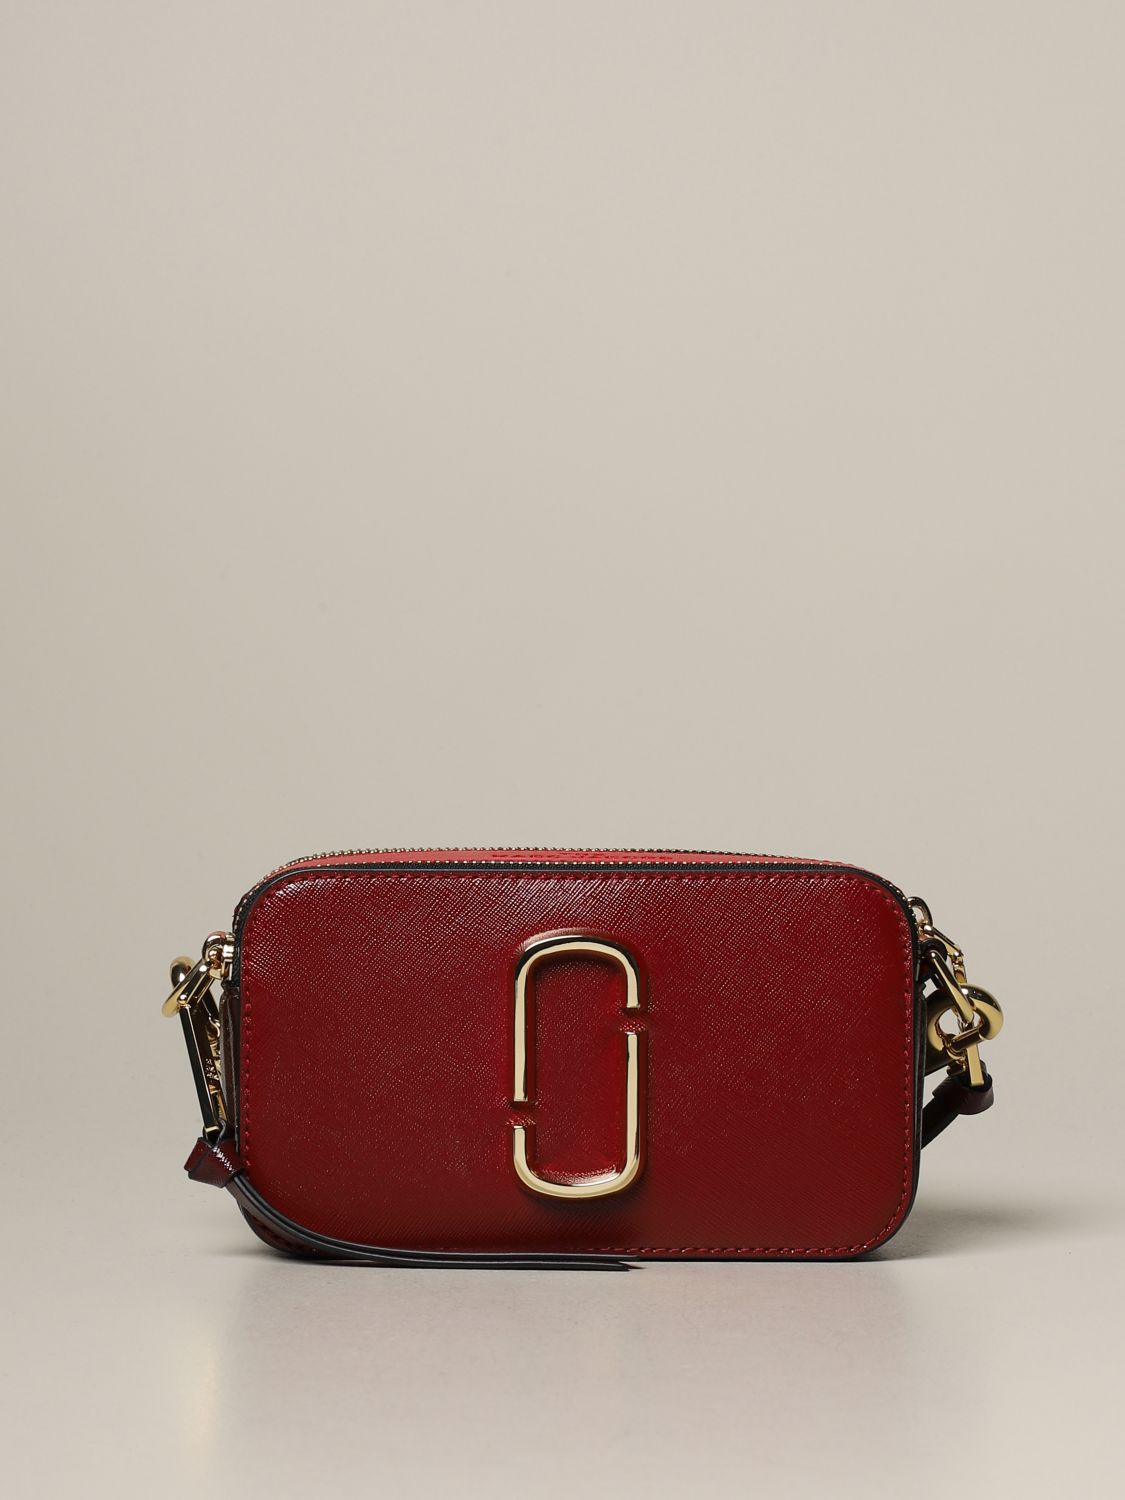 MARC JACOBS: The Snapshot multicolor bag - Red  Marc Jacobs mini bag  M0012007 online at